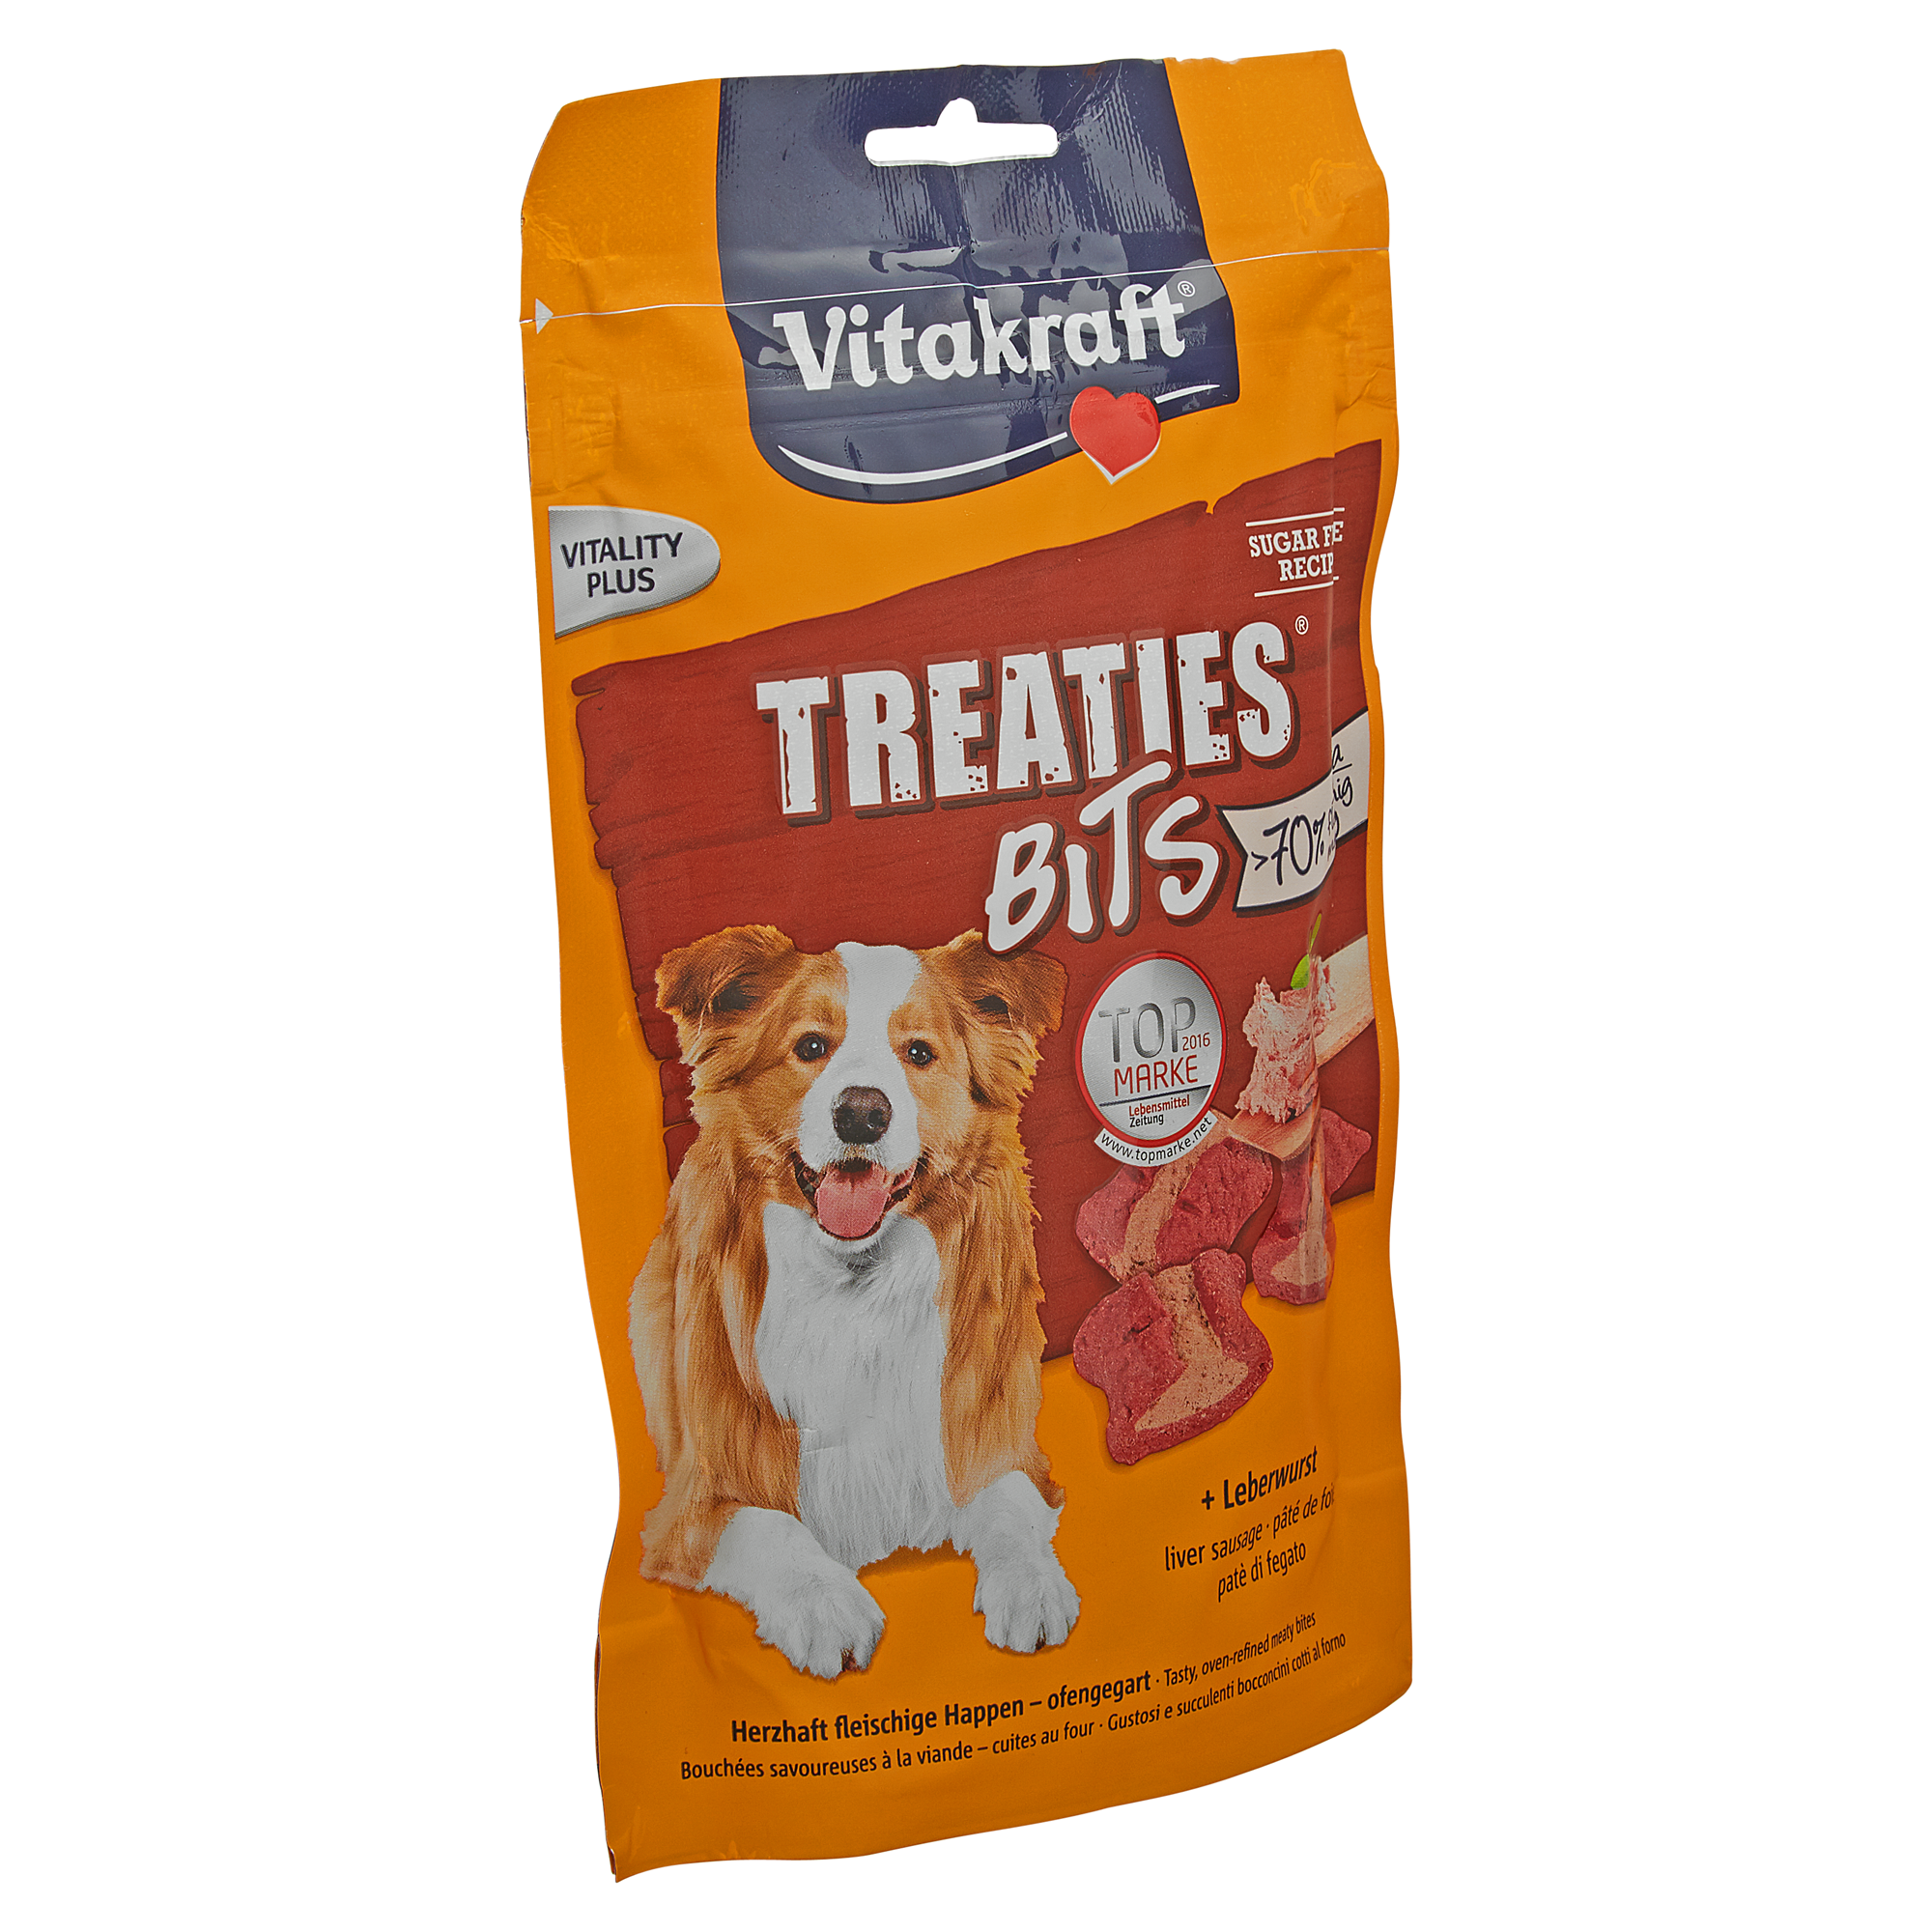 Hundesnack "Treaties" Bits mit Leberwurst 120 g + product picture